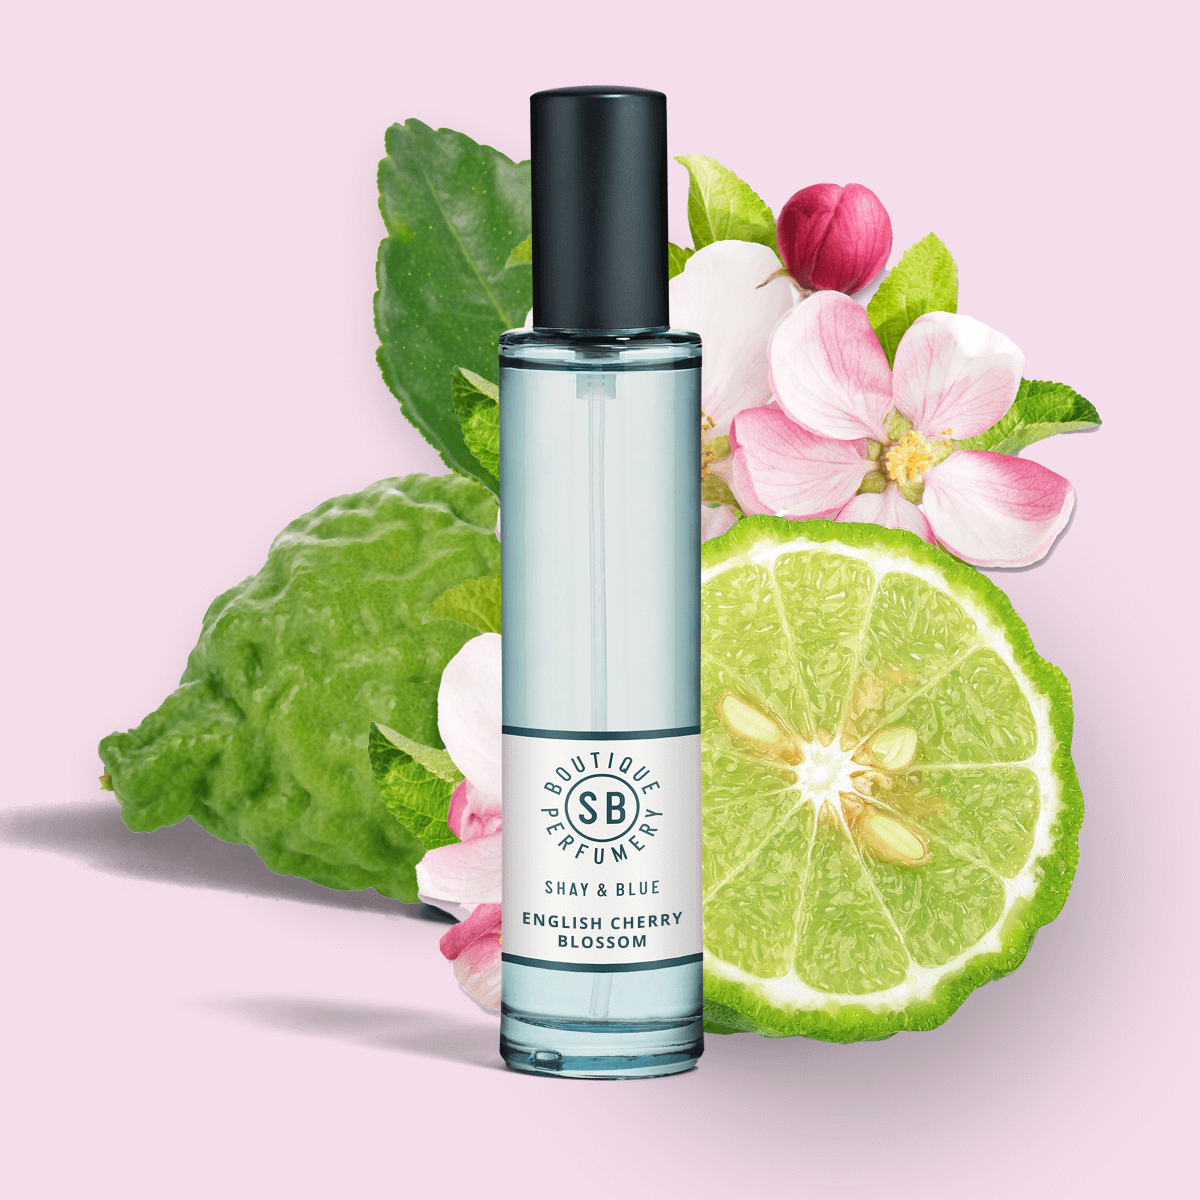 English Cherry Blossom Fragrance 30ml | Airy blossom with black cherries, fig and bergamot for a sparkling citrus lift. | Clean All Gender Fragrance | Shay & Blue